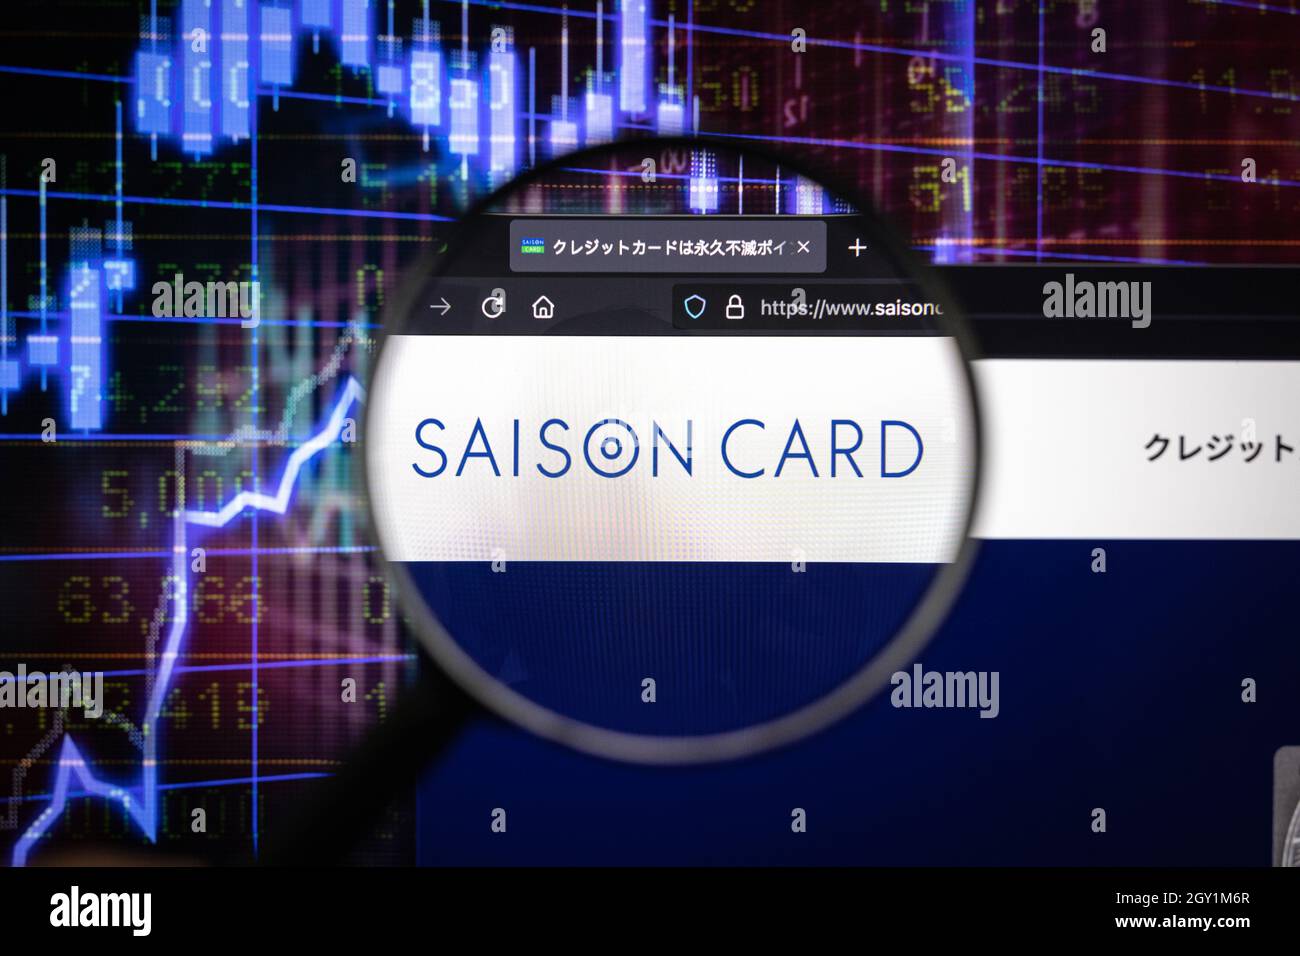 Saison Card company logo on a website with blurry stock market developments in the background, seen on a computer screen through a magnifying glass Stock Photo